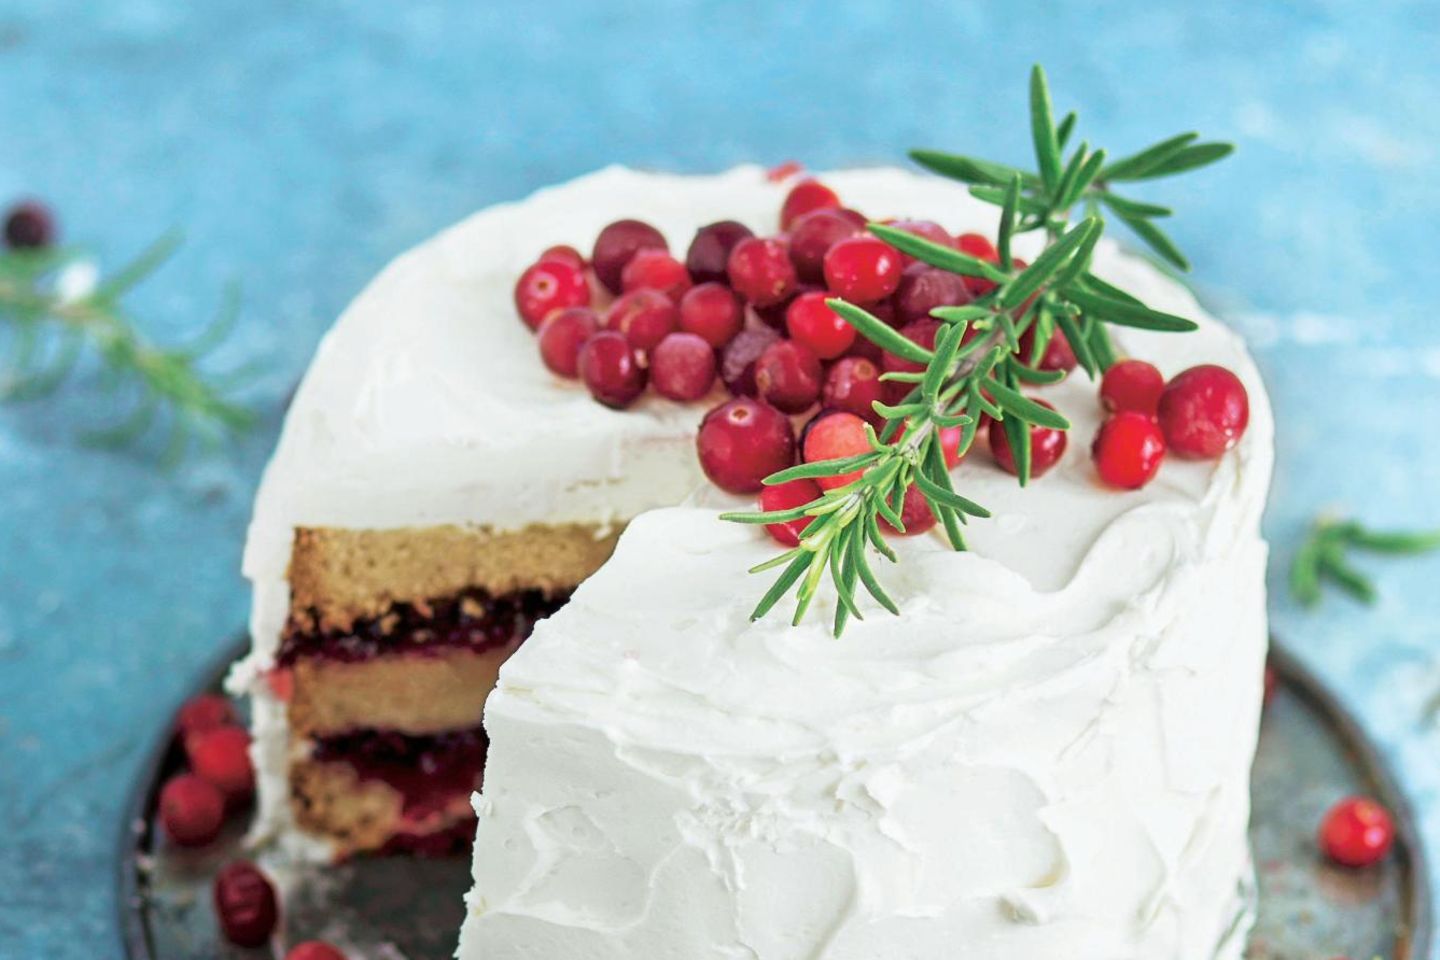 Cranberry-Cake mit Frosting